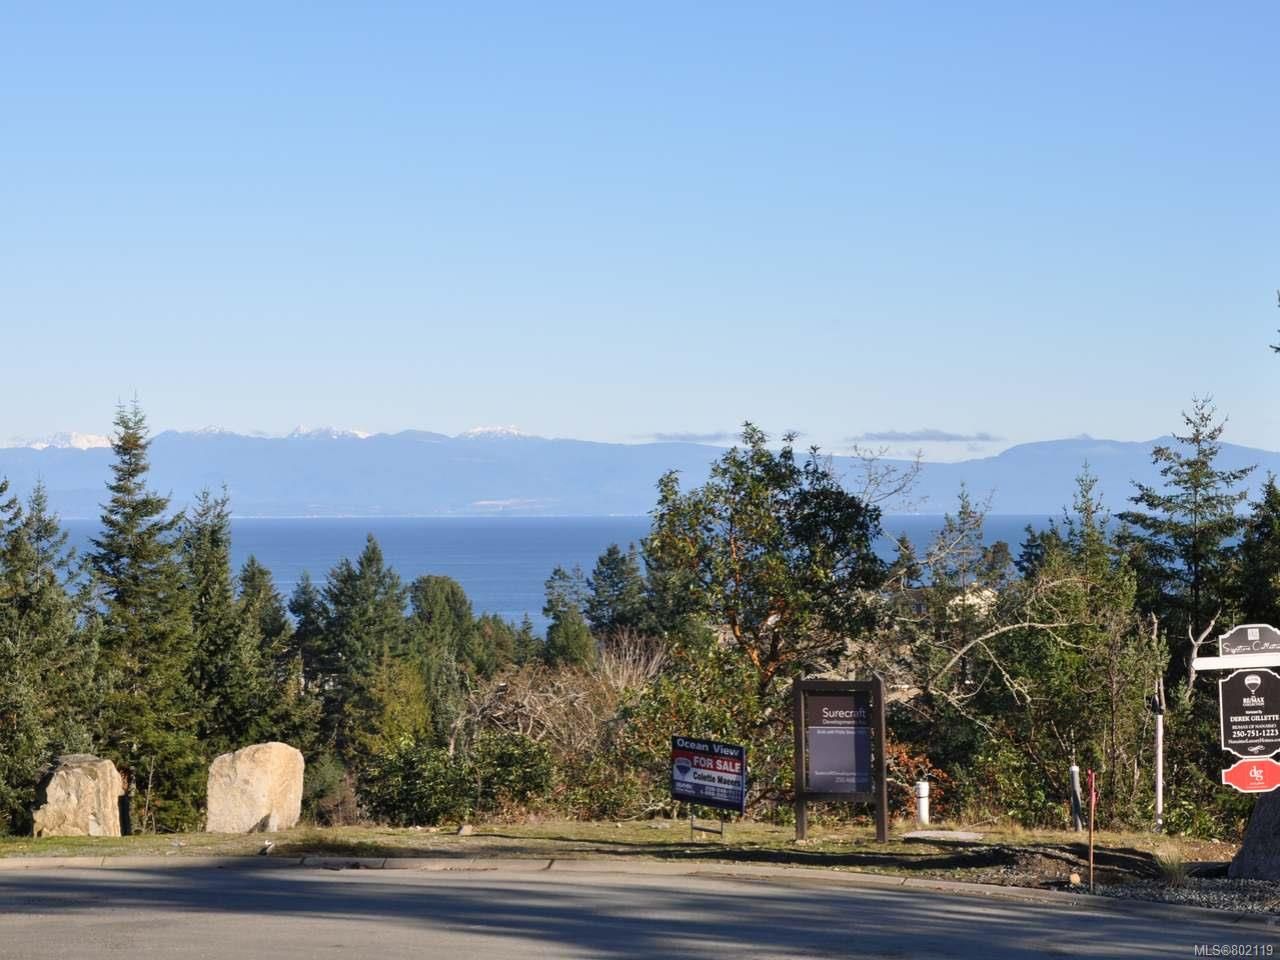 Main Photo: LOT 3 BROMLEY PLACE in NANOOSE BAY: PQ Fairwinds Land for sale (Parksville/Qualicum)  : MLS®# 802119